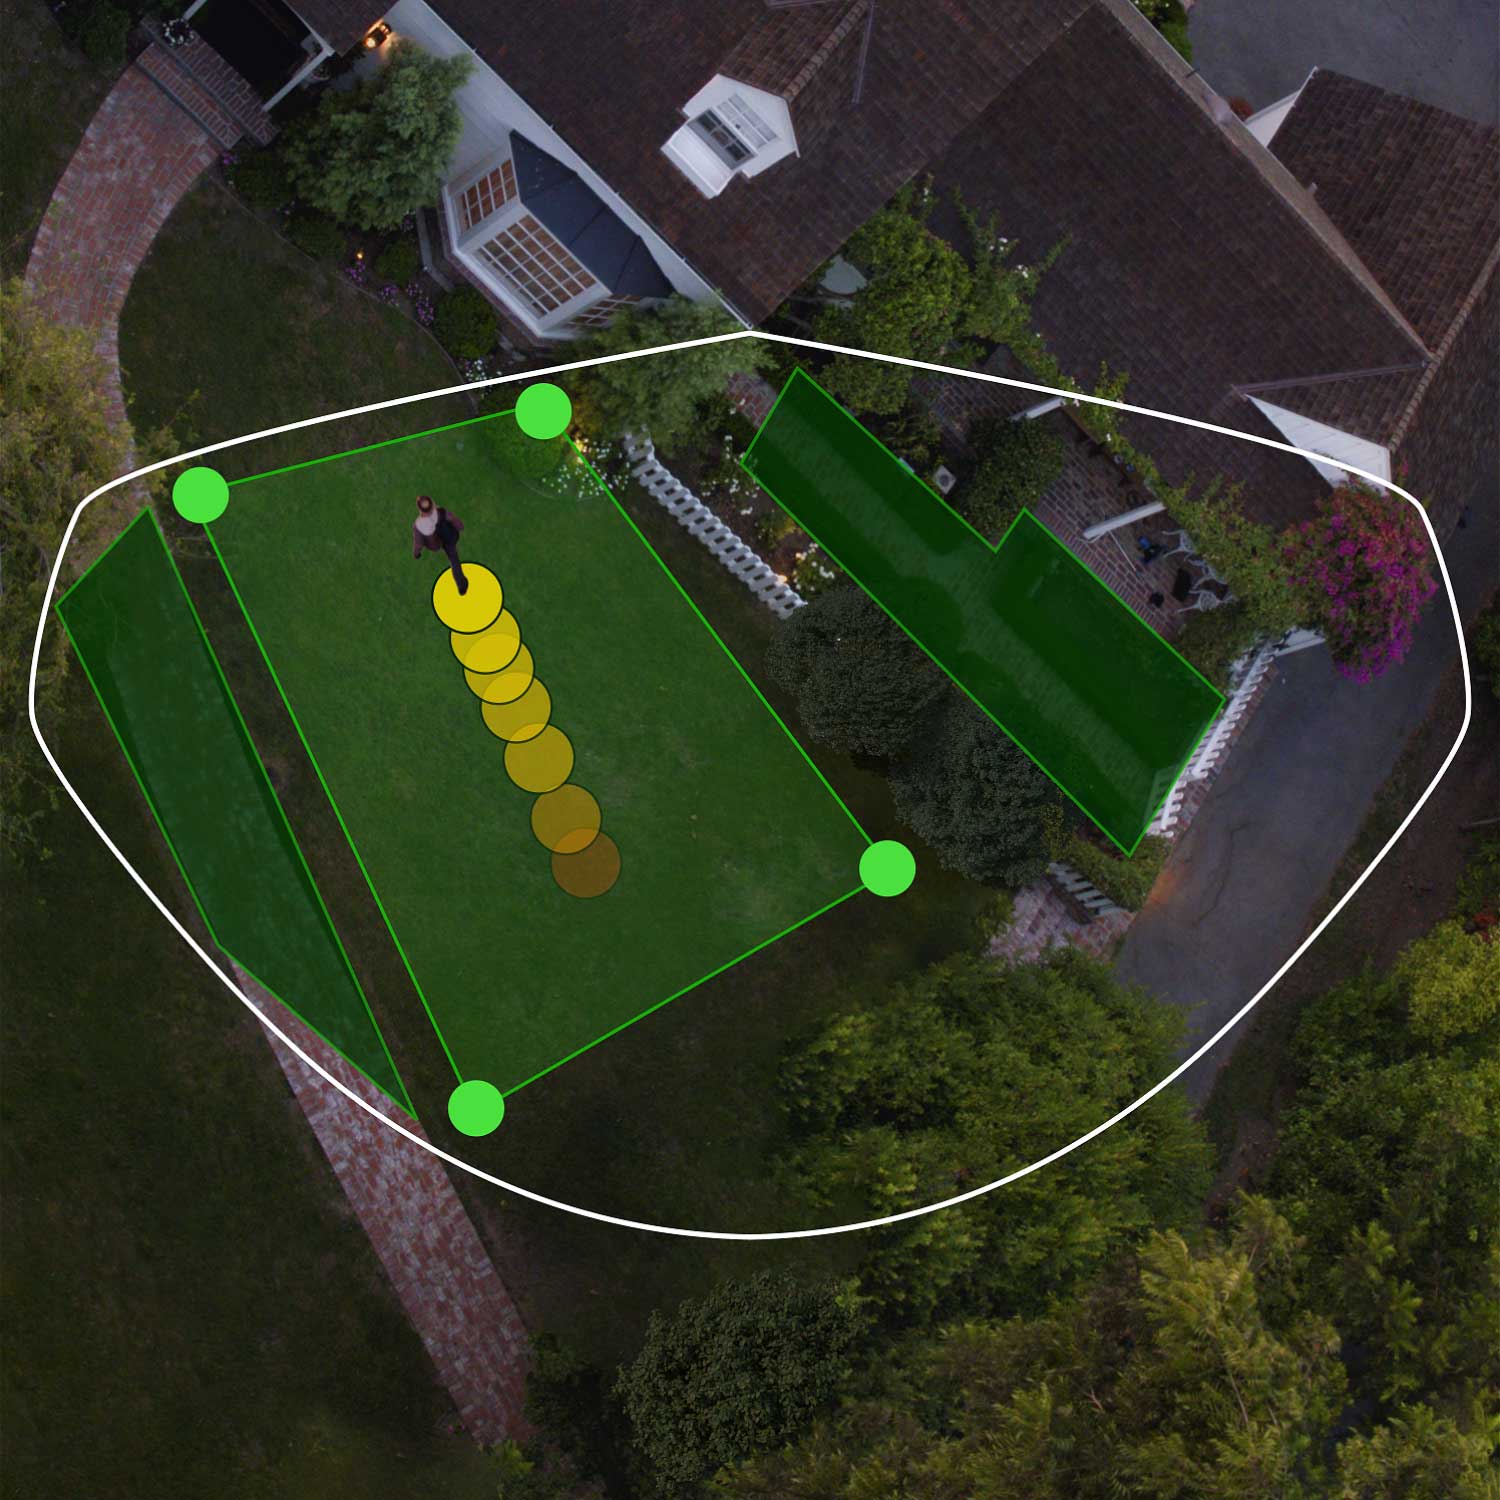 Floodlight Cam Pro (Plug-In) - Aerial view of front of house showing bird's eye view zones in green. Person walks toward front door, their path indicated by yellow dots.